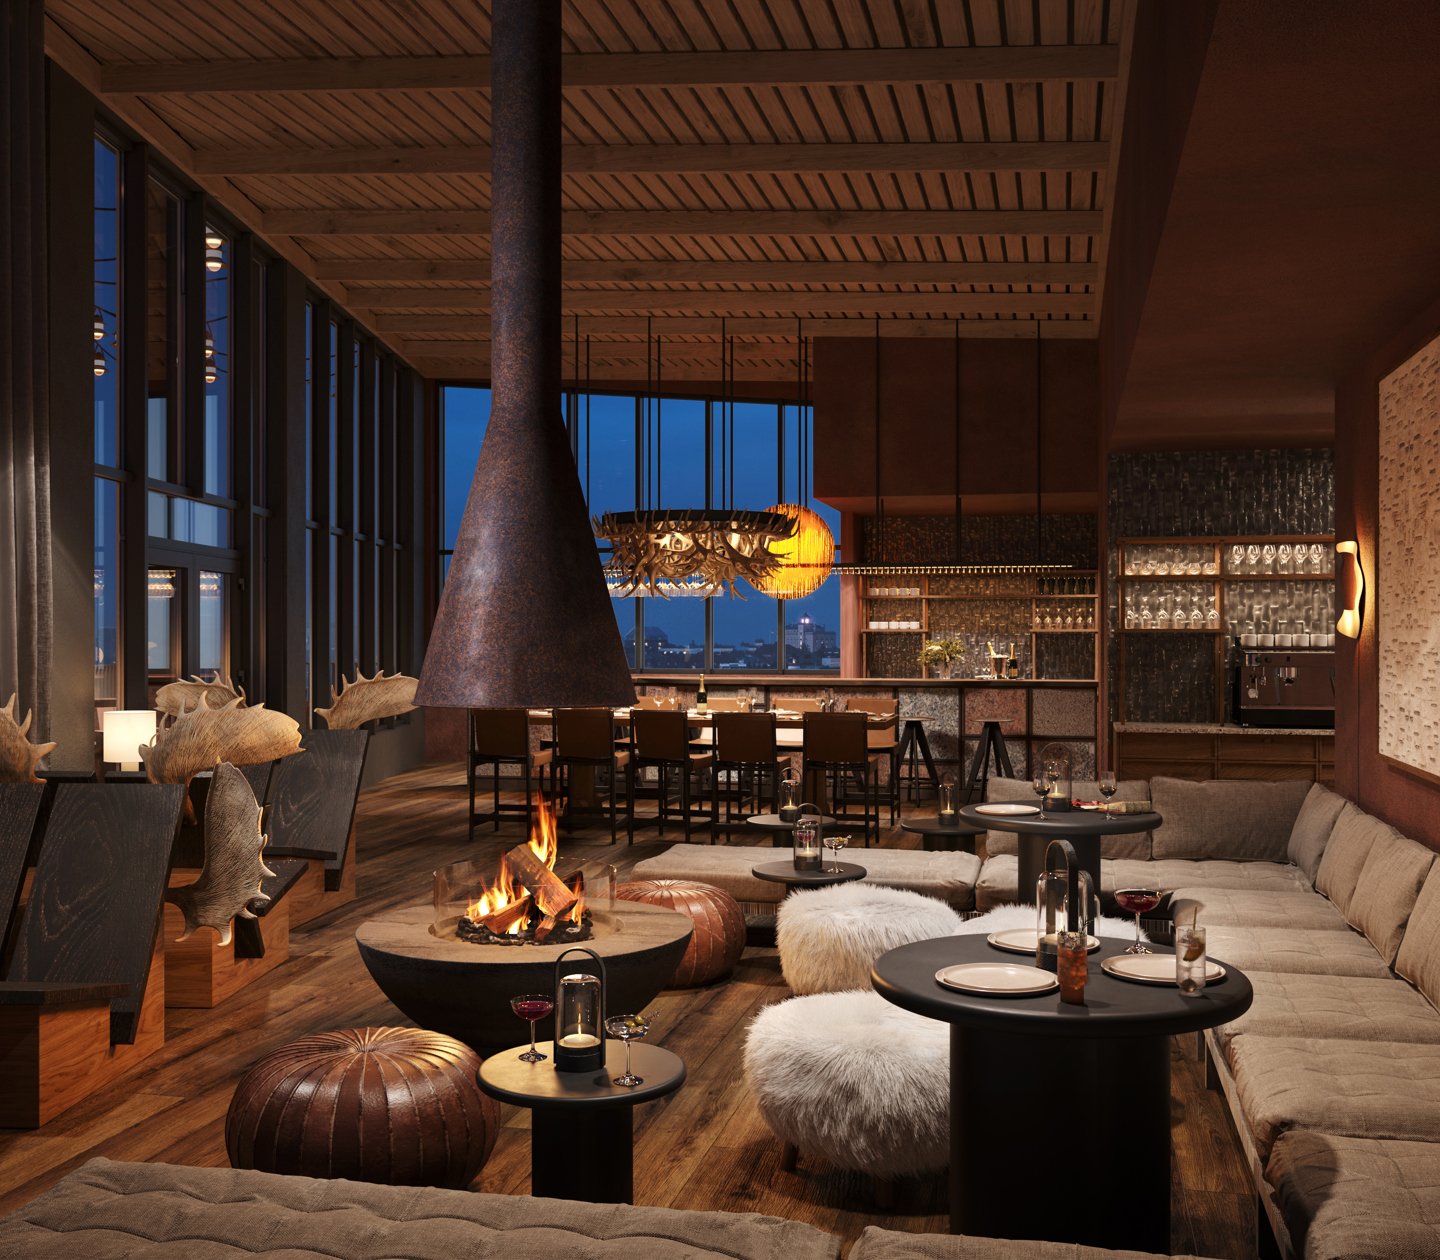  Cozy bar with a fireplace and plenty of seating.